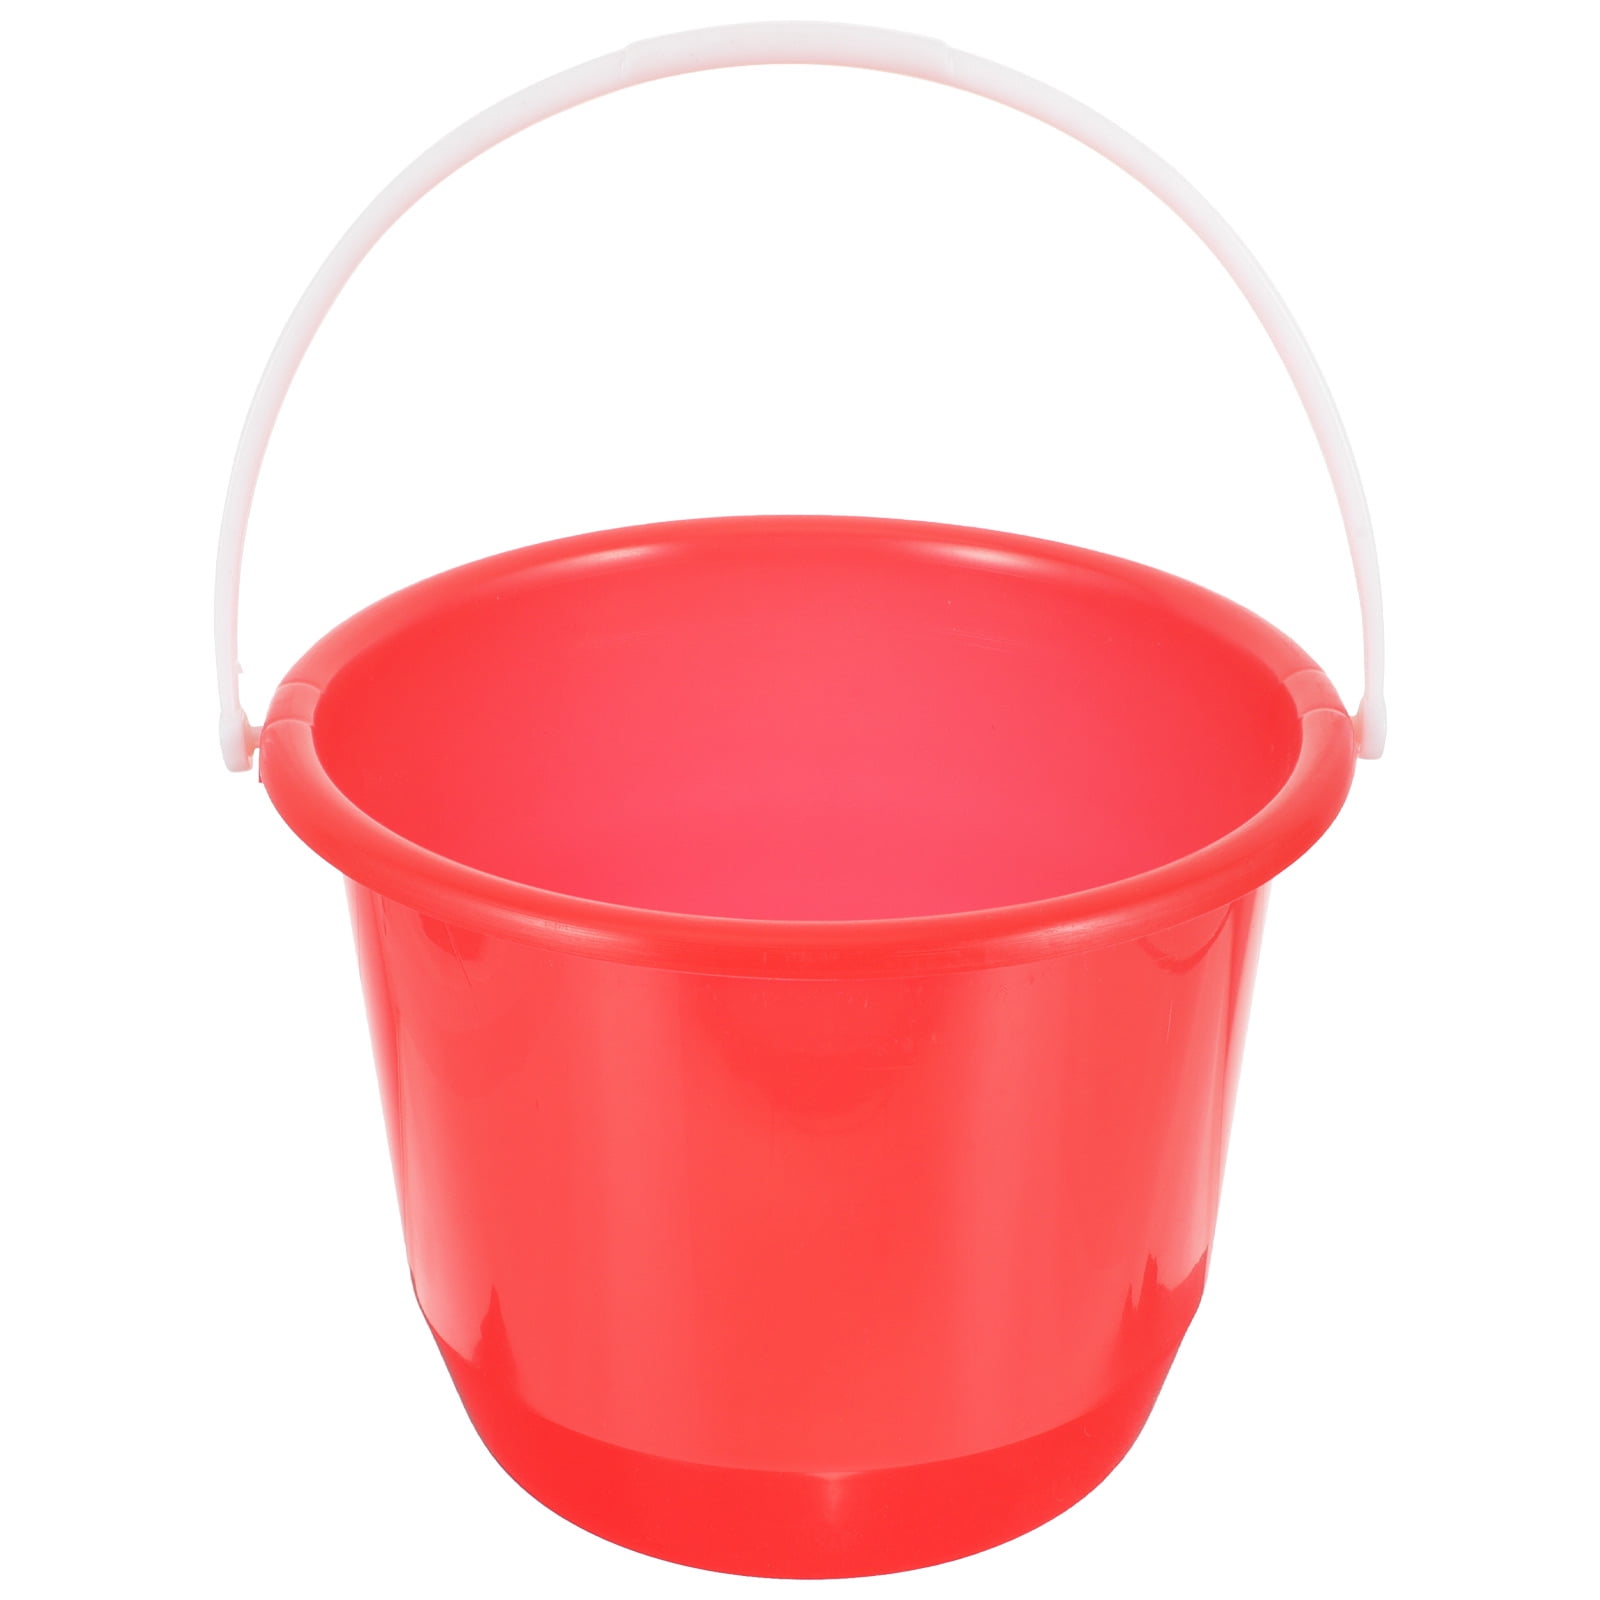  Multipurpose Apple Red Plastic Bucket with Handle - 6.25 x  4.5 (1 Pc) - Sturdy & Durable Design - Perfect for Storage, Home, Garden,  & DIY Projects : Health & Household